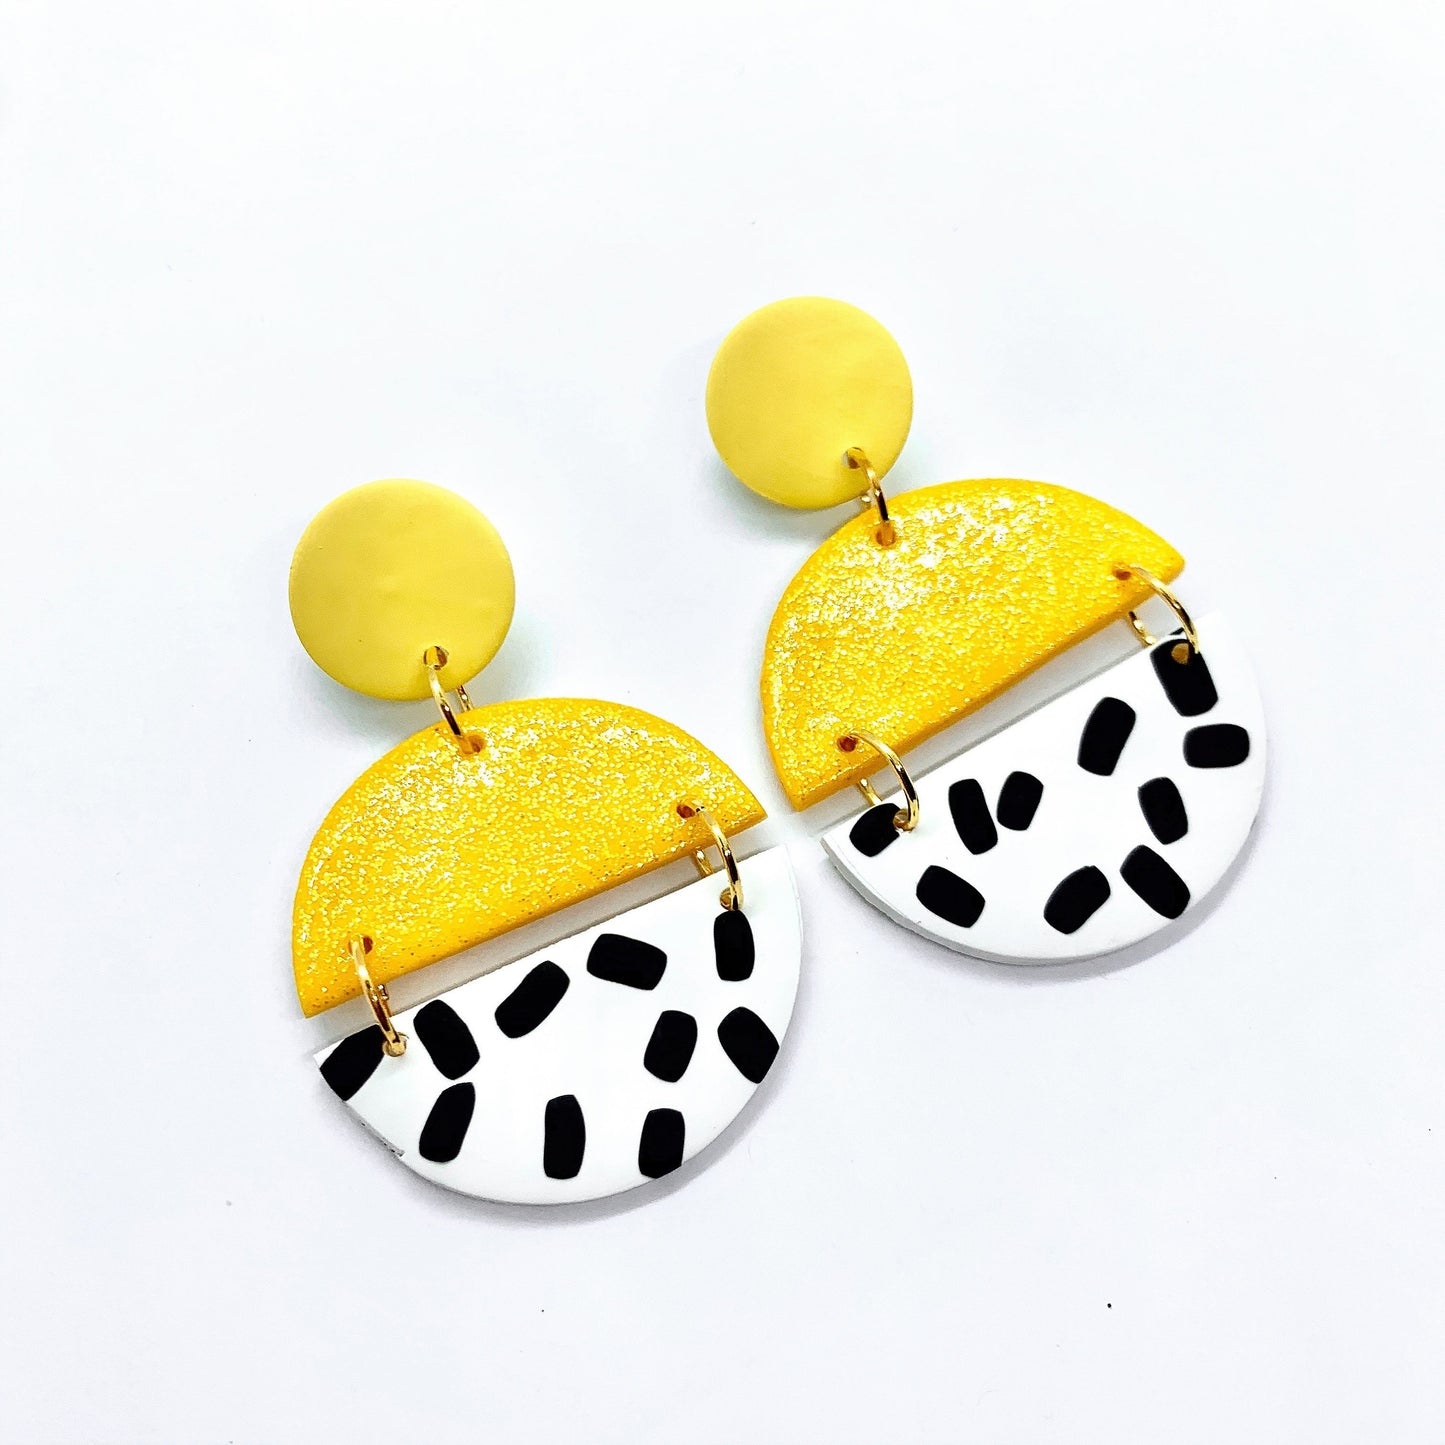 handmade polymer clay earrings in yellow glitter and black and white polka-dots